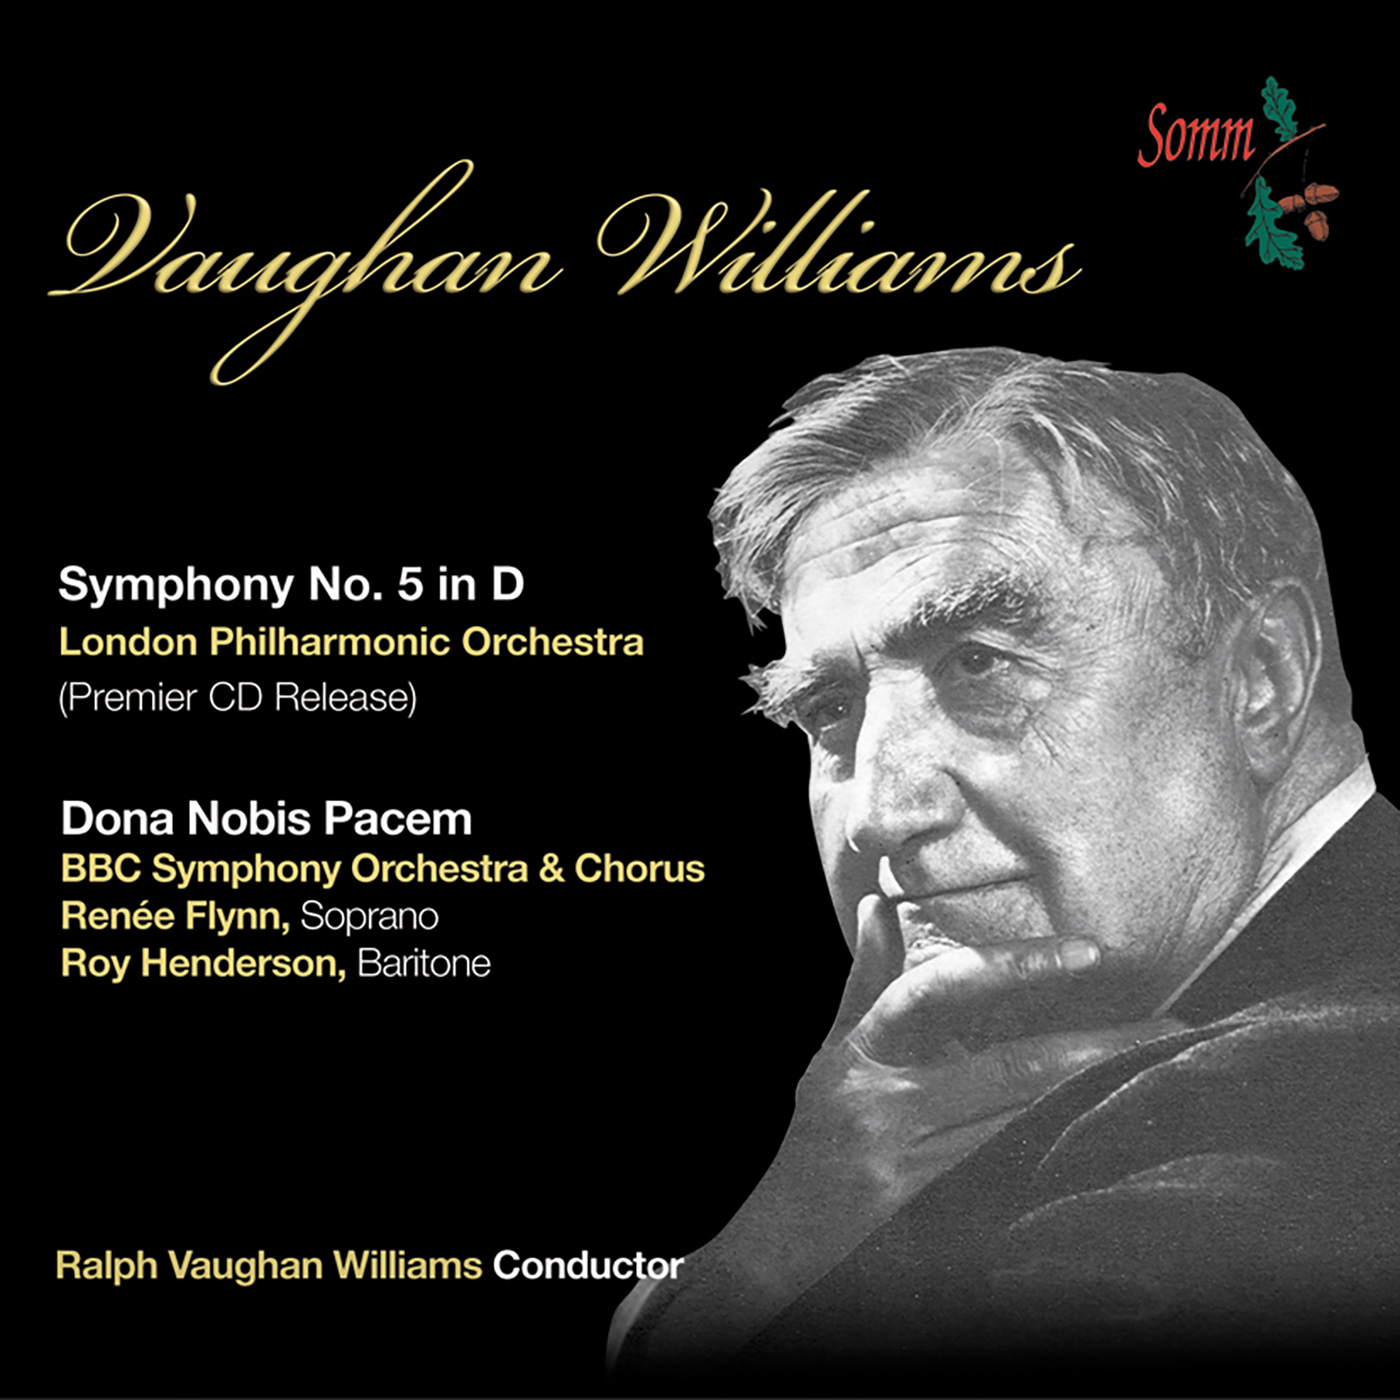 VAUGHAN WILLIAMS, R.: Symphony No. 5 / Dona Nobis Pacem (London Philharmoic, BBC Symphony Chorus and Orchestra, Vaughan Williams) (1936, 1952)